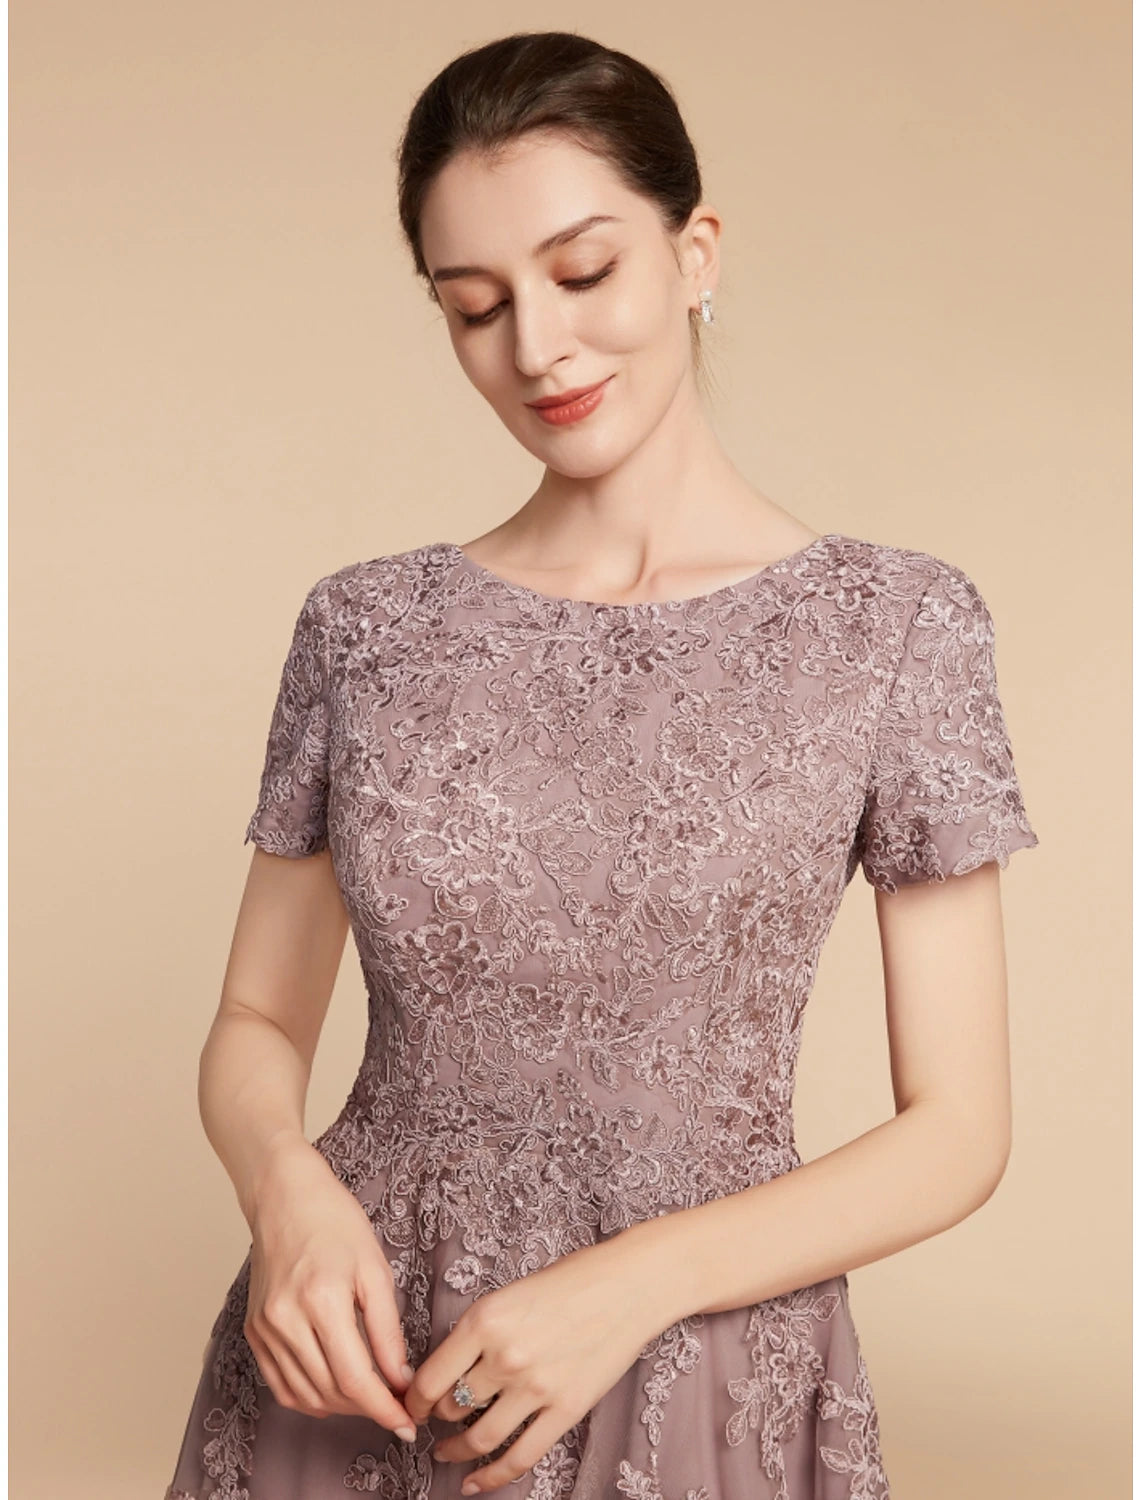 A-Line Mother of the Bride Dress Wedding Guest Elegant Petite Jewel Neck Tea Length Lace Tulle Short Sleeve with Ruching Flower